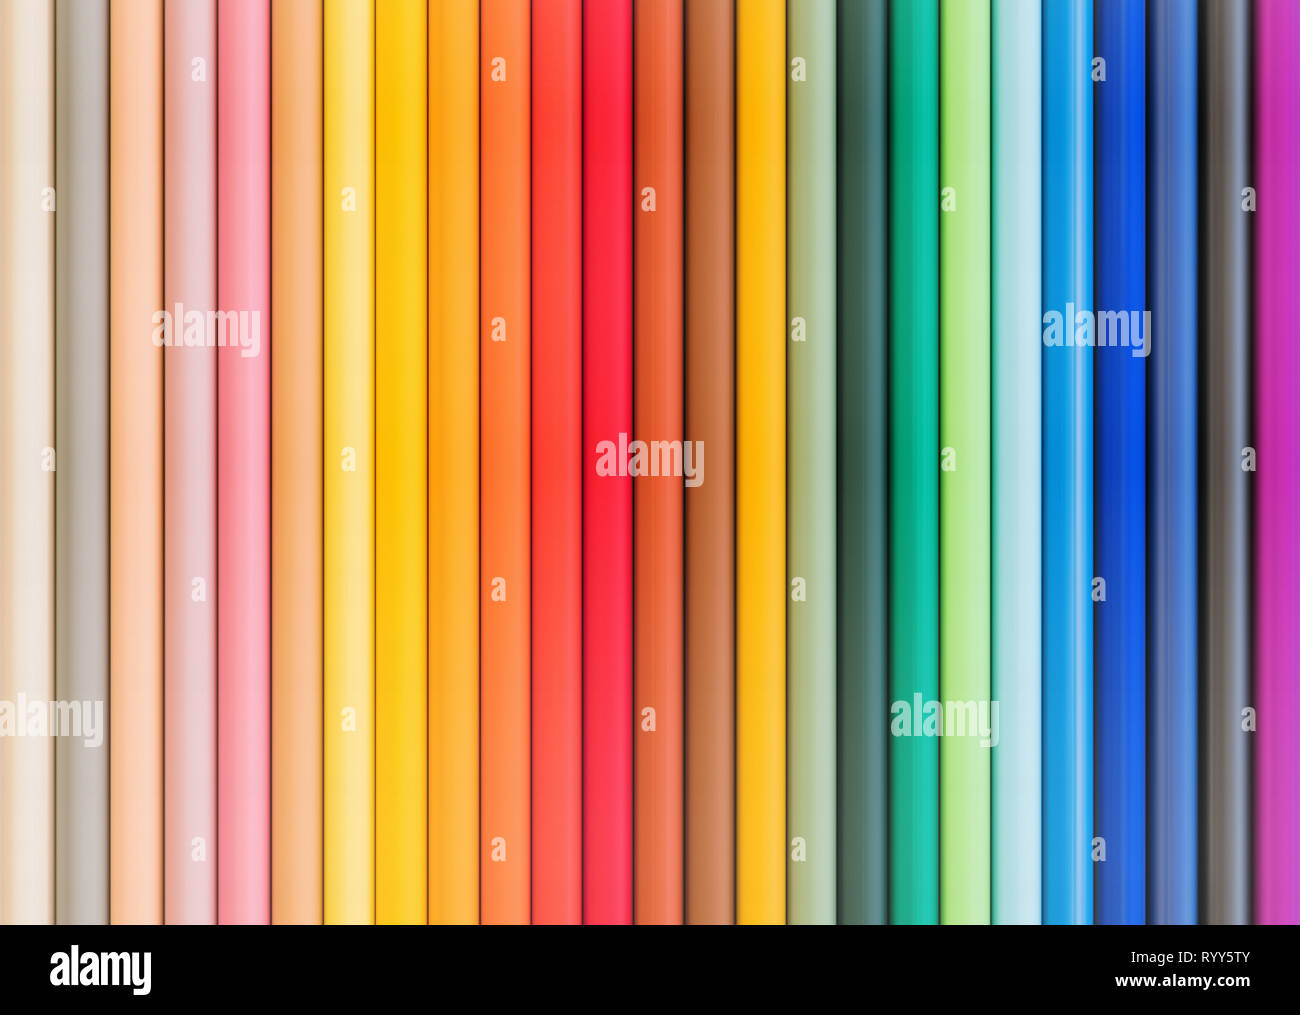 Abstract colors background. Vertical strip colorful backgrounds Stock Photo